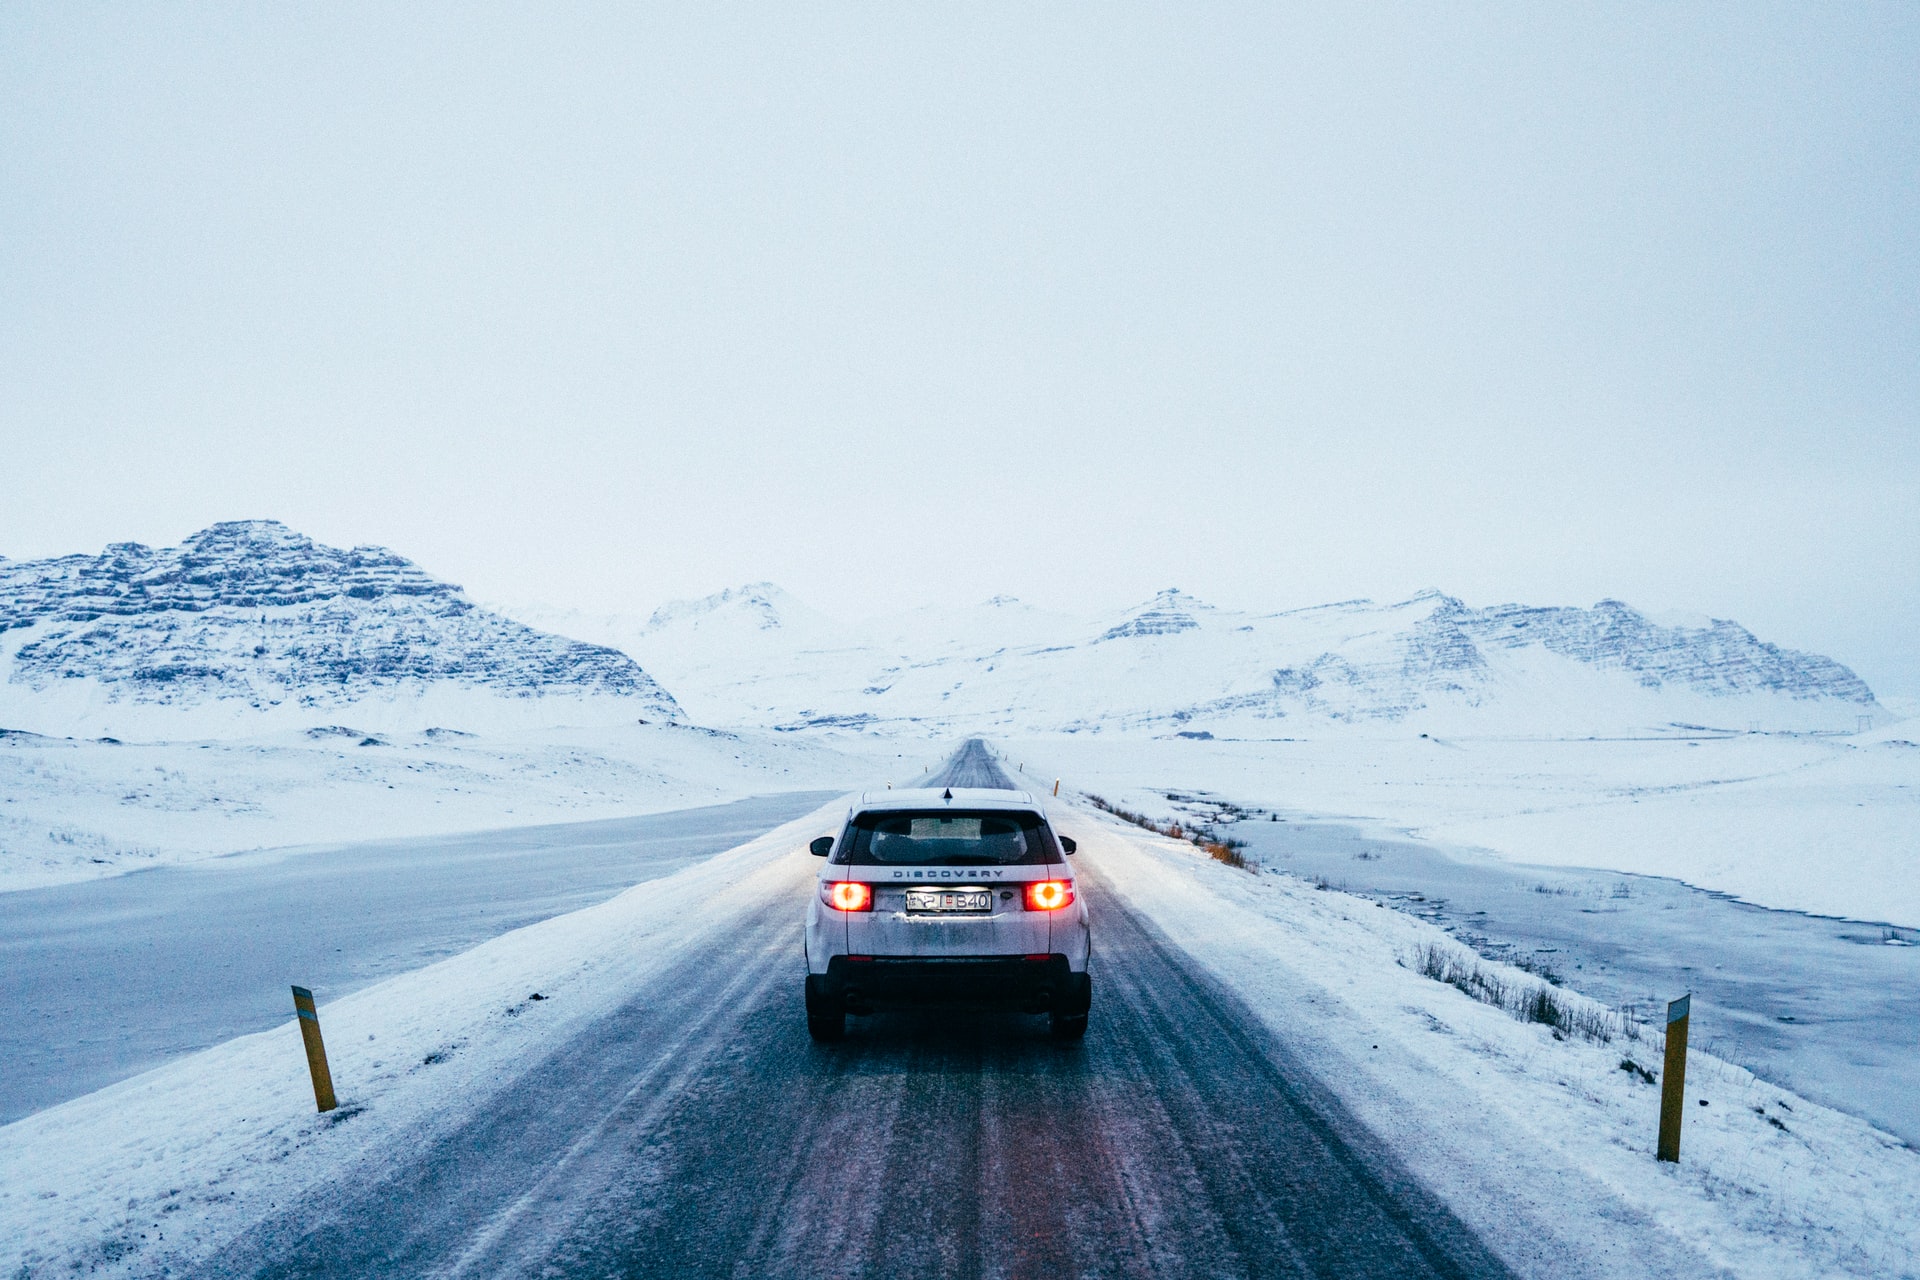 Tips for Driving a Car On Snowy Terrain